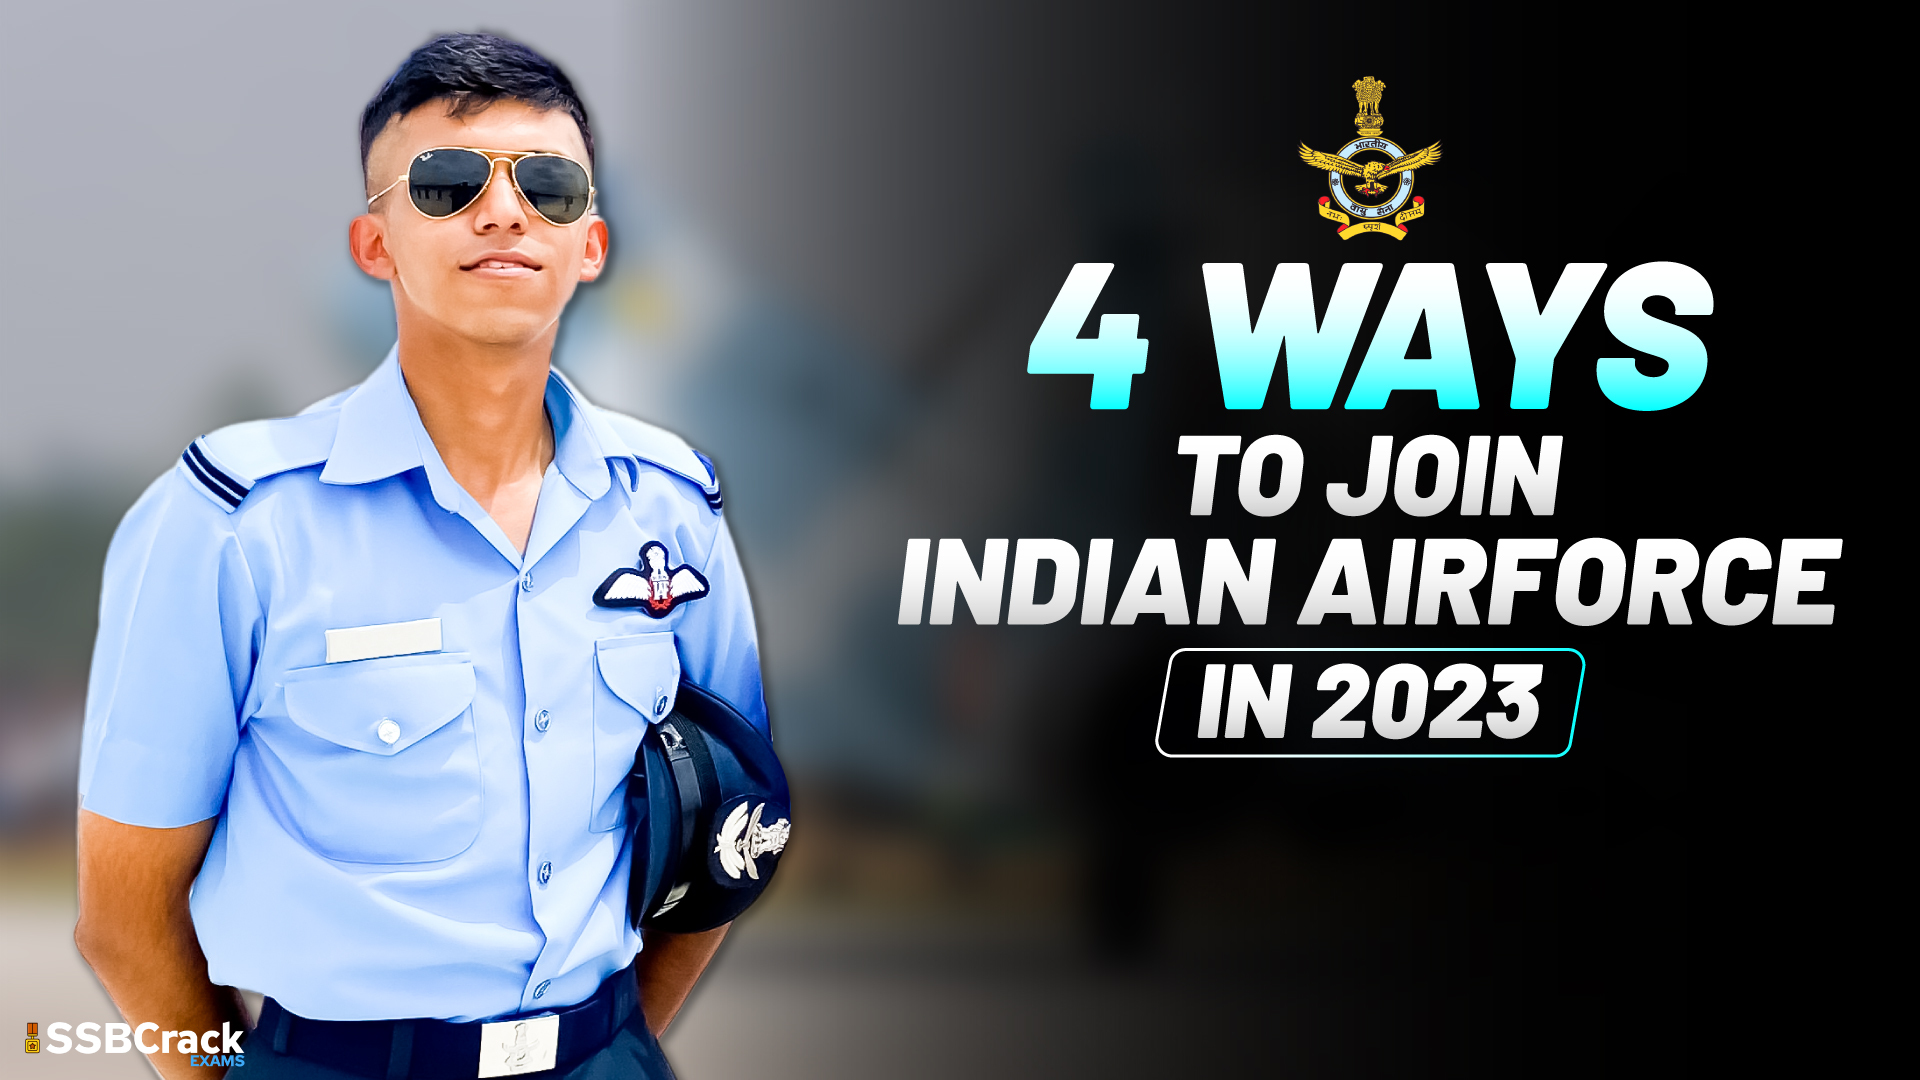 4 Ways To Join Indian Air Force in 2023